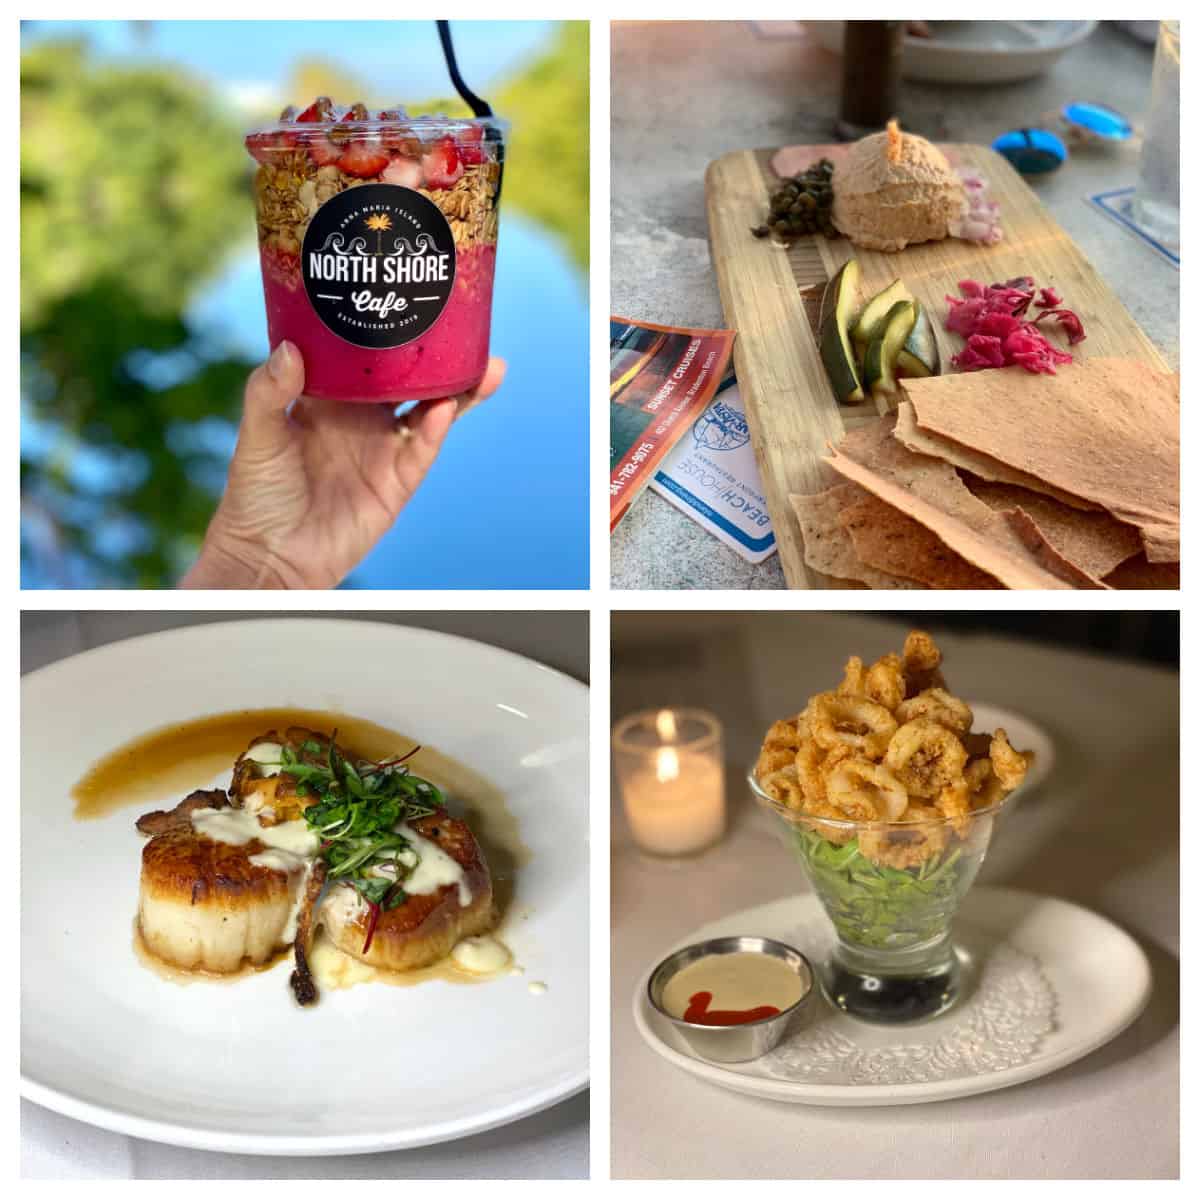 Collage of dishes from Anna Maria Island restaurants.